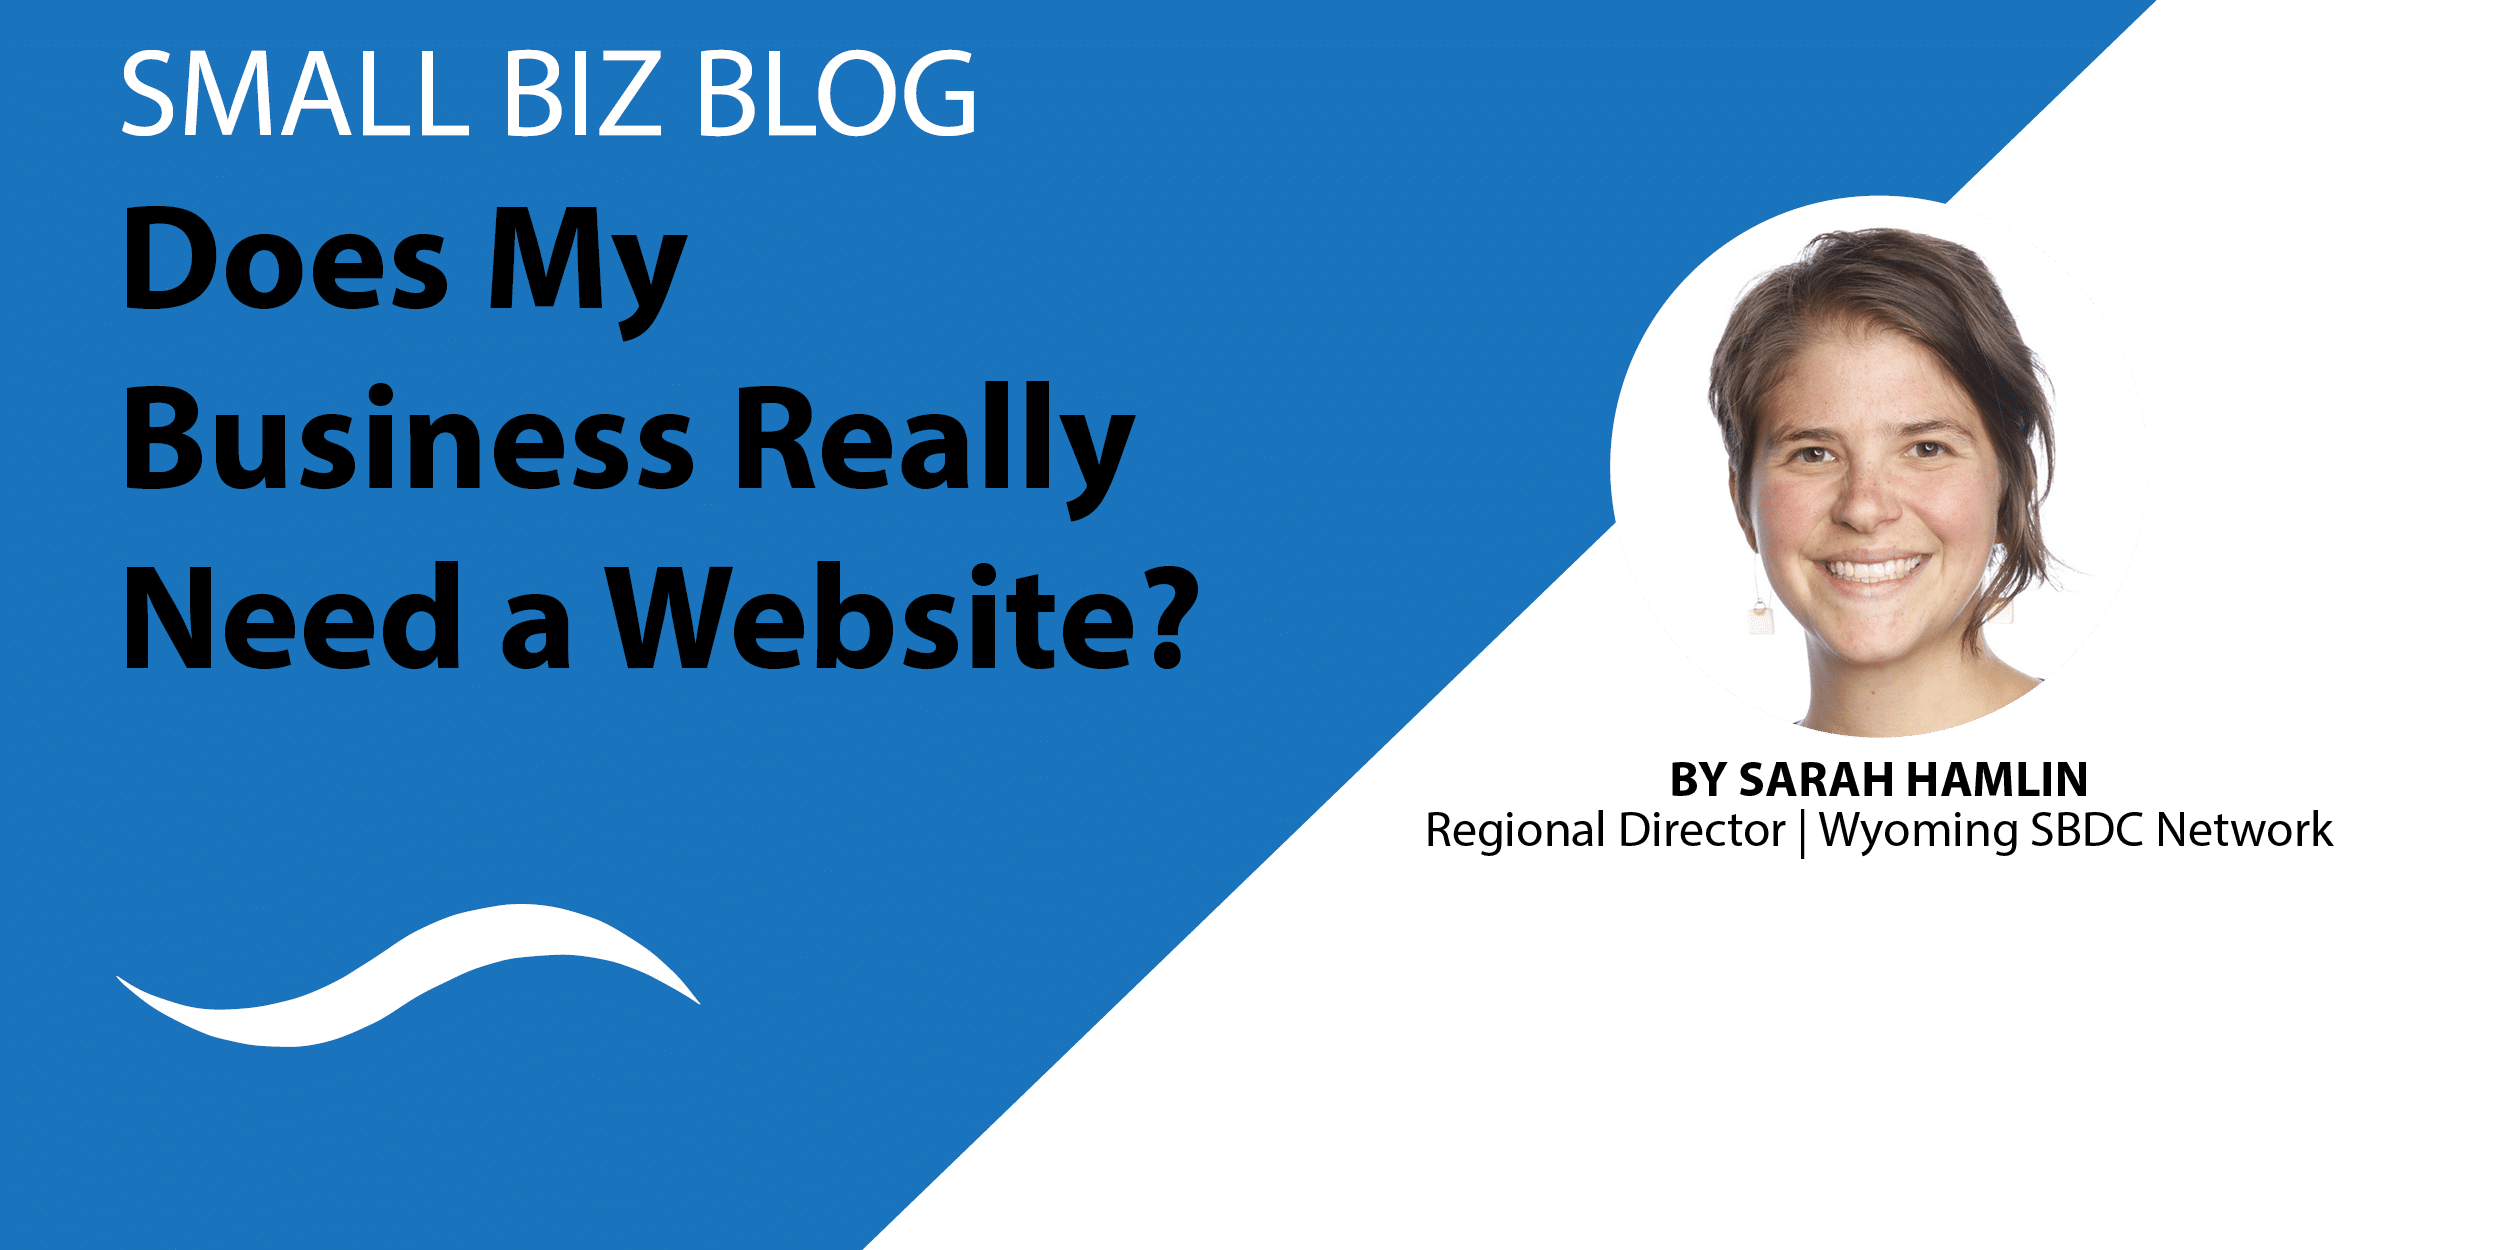 Does My Business Really Need a Website?